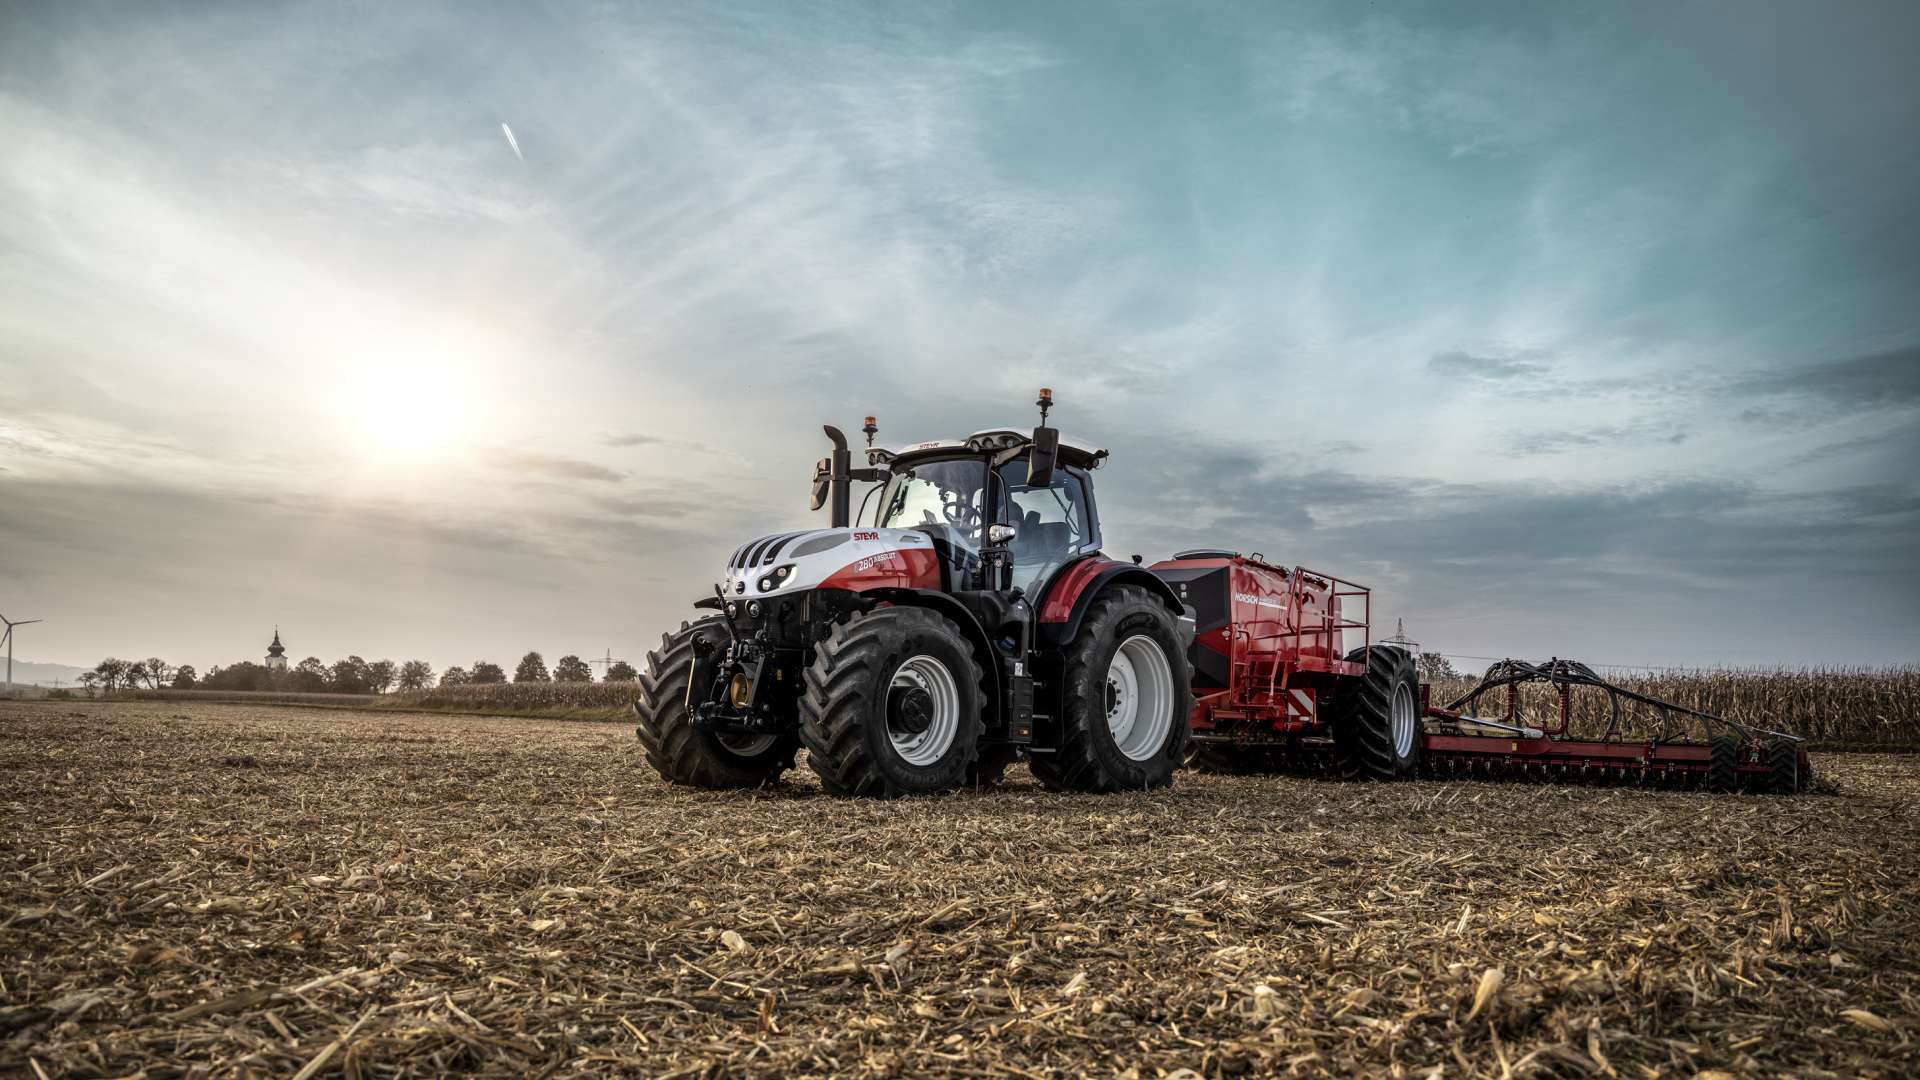 The best tractors in the field